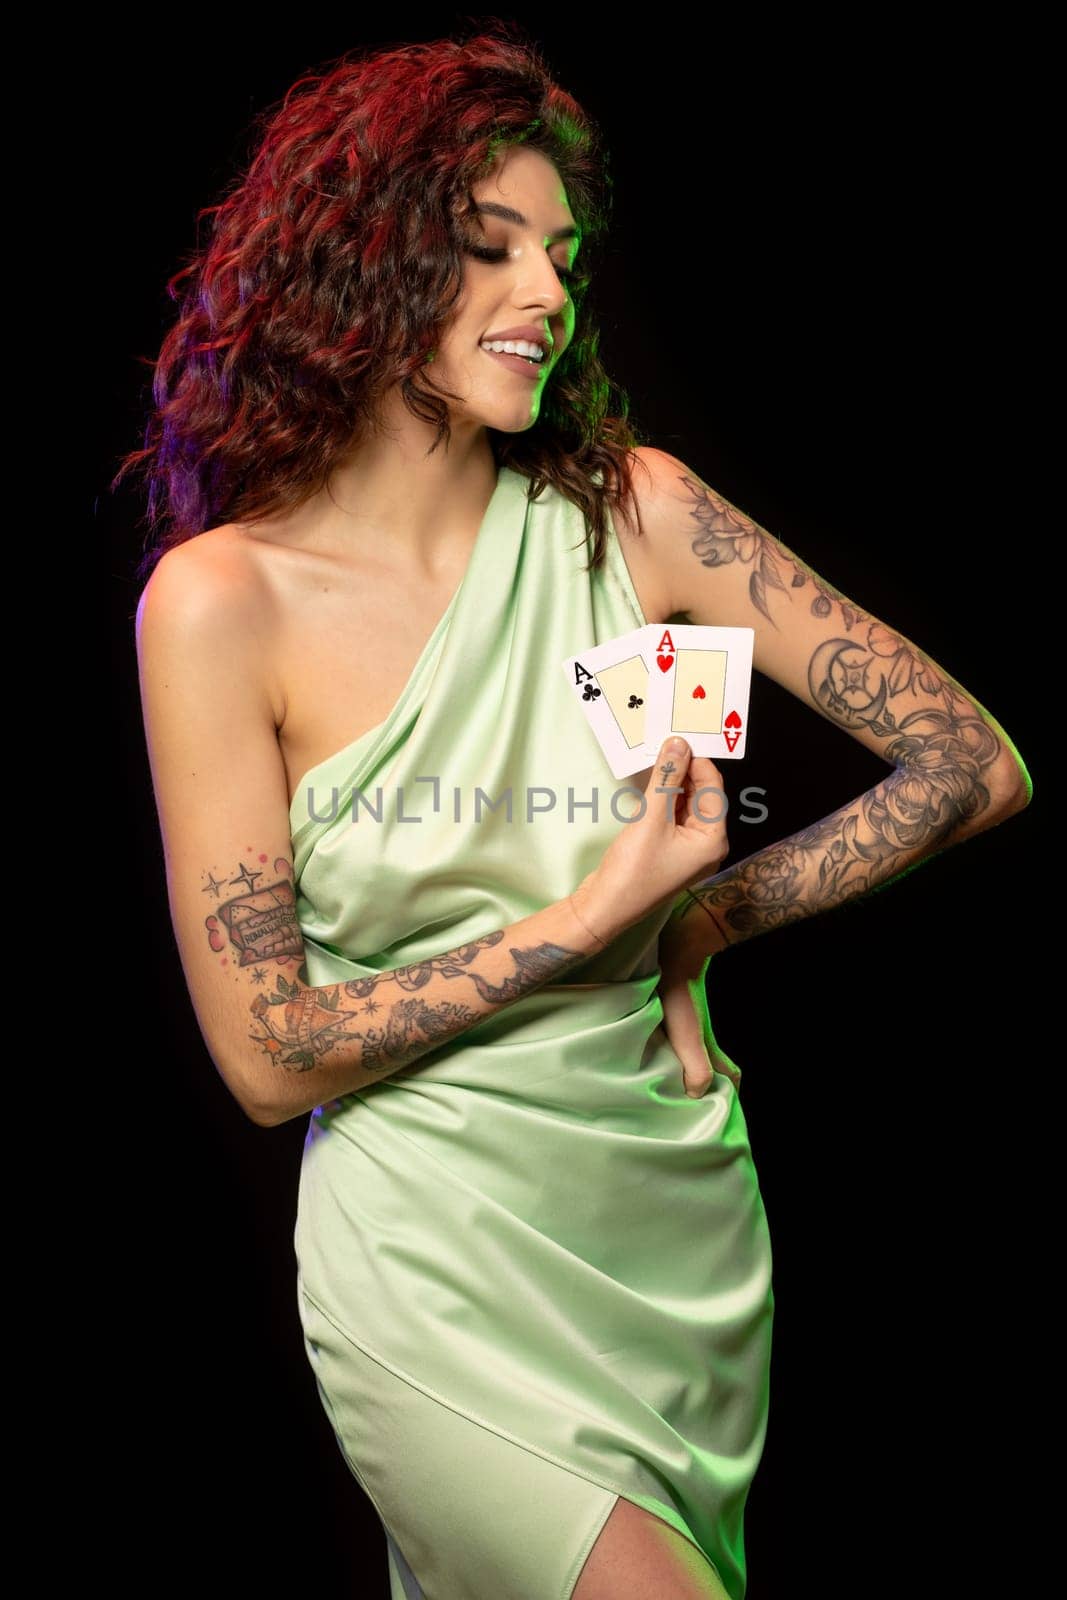 Successful young female poker player in light green dress with naked shoulder and tattoo on arms standing against black background, holding winning pair of aces. Gambling concept